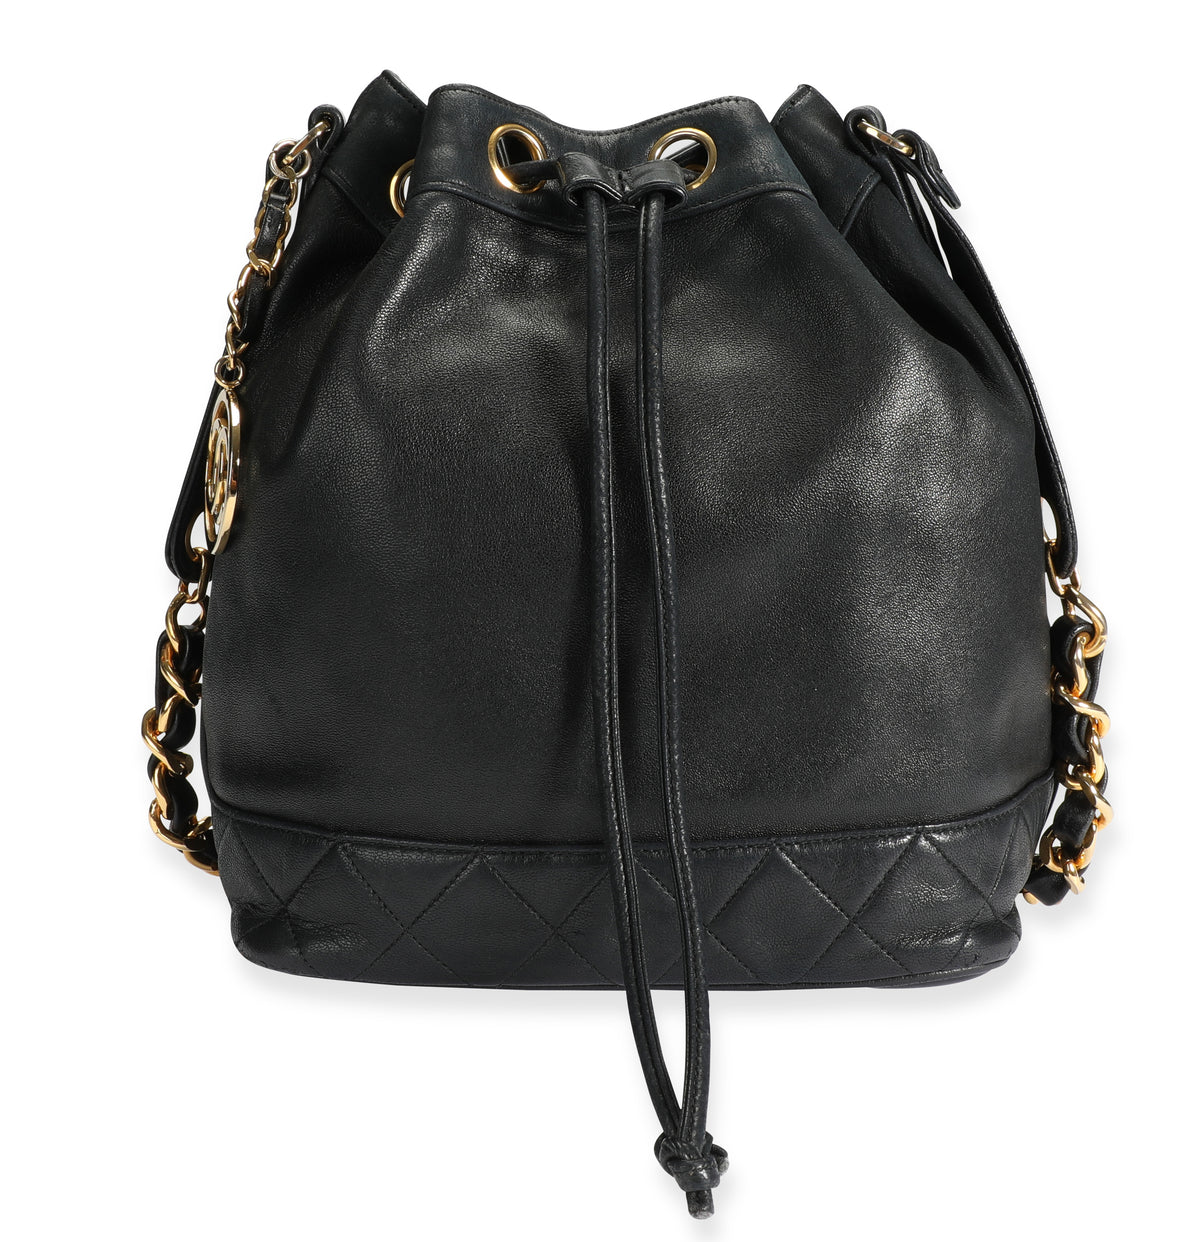 CHANEL, Bags, Chanel Vintage Quilted Bucket Bag